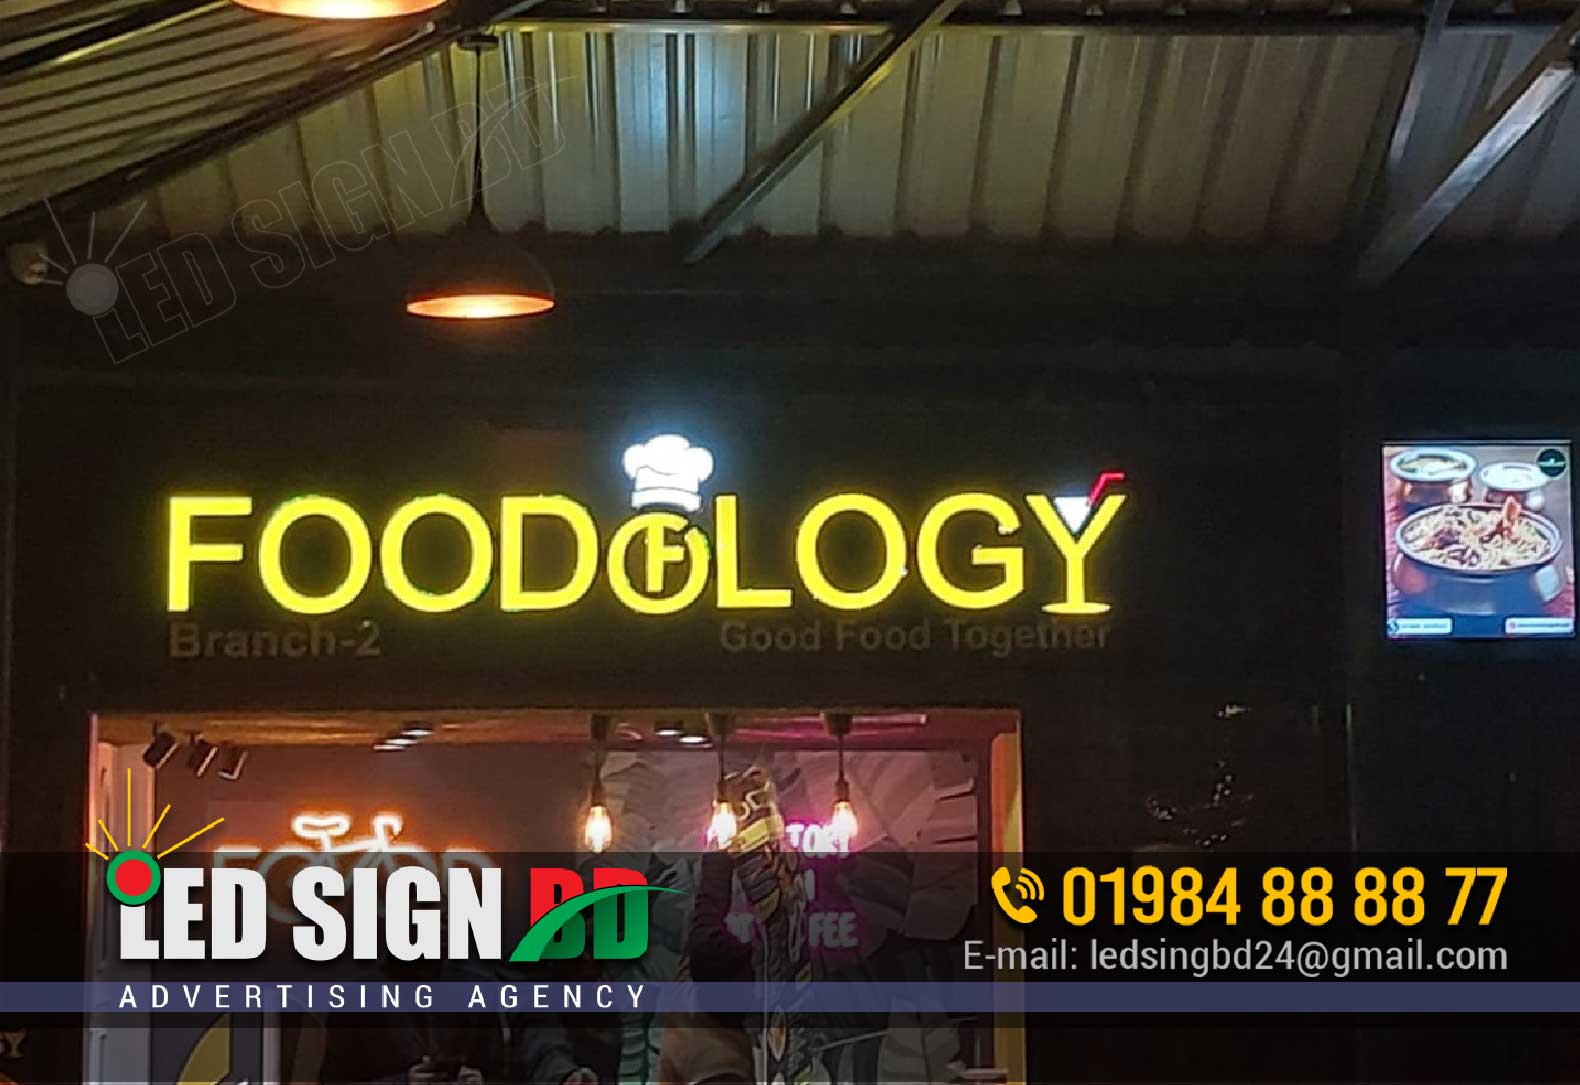 Food Court Logo Signage, SS BACKLIT SIGNAGE BD, TOP 10 LED SIGNS COMPANY IN DHAKA, Acrylic Letter with sitelit signage in Dhaka Bangladesh. BANGLADESH, Pana Lighting Signboard Signage in Dhaka Bangladesh, Best Led Signage Company in Dhaka Bangladesh.